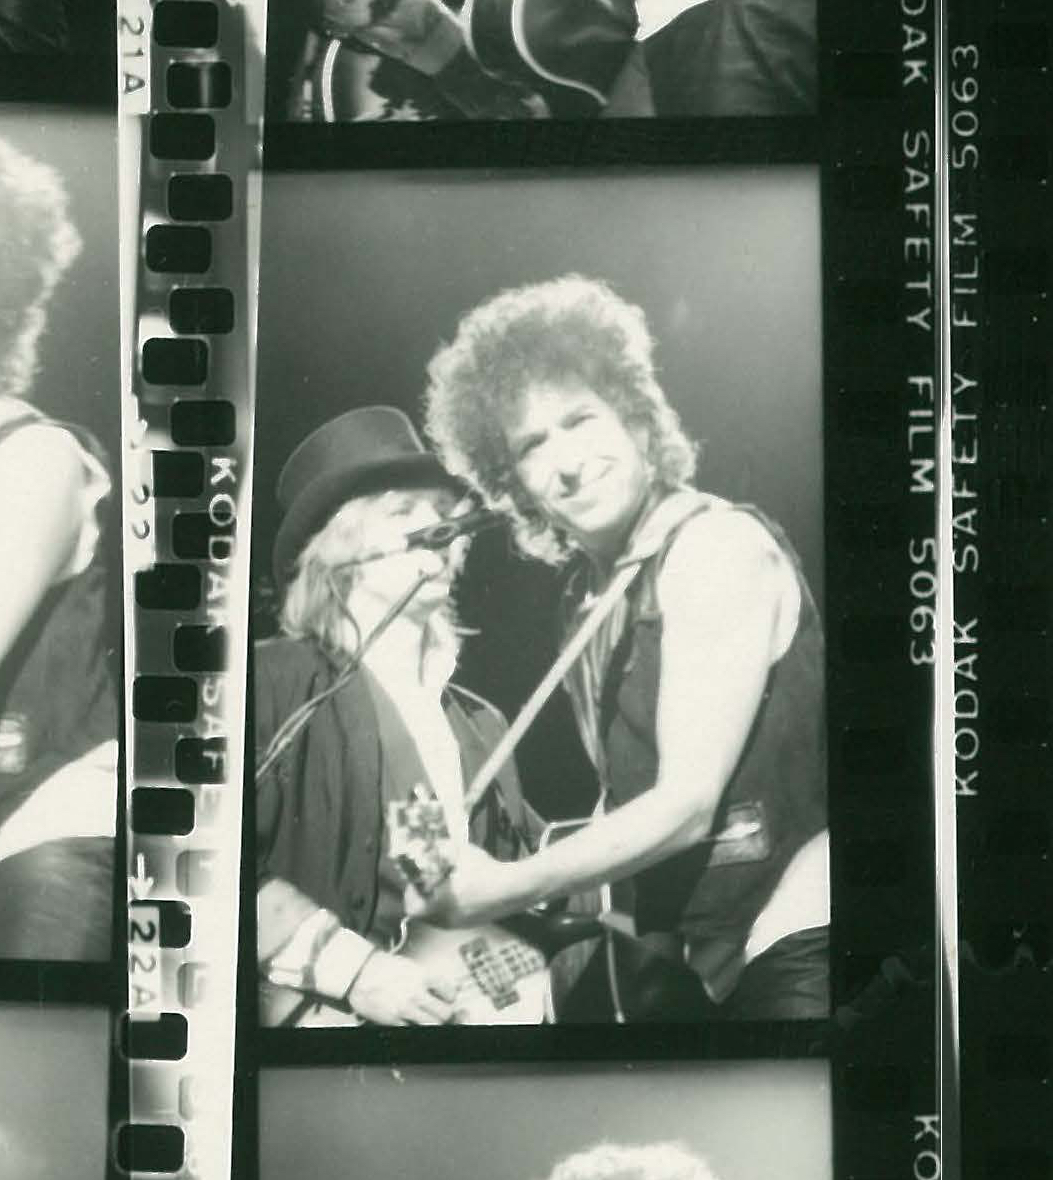 Photograph of Bob Dylan and Tom Petty